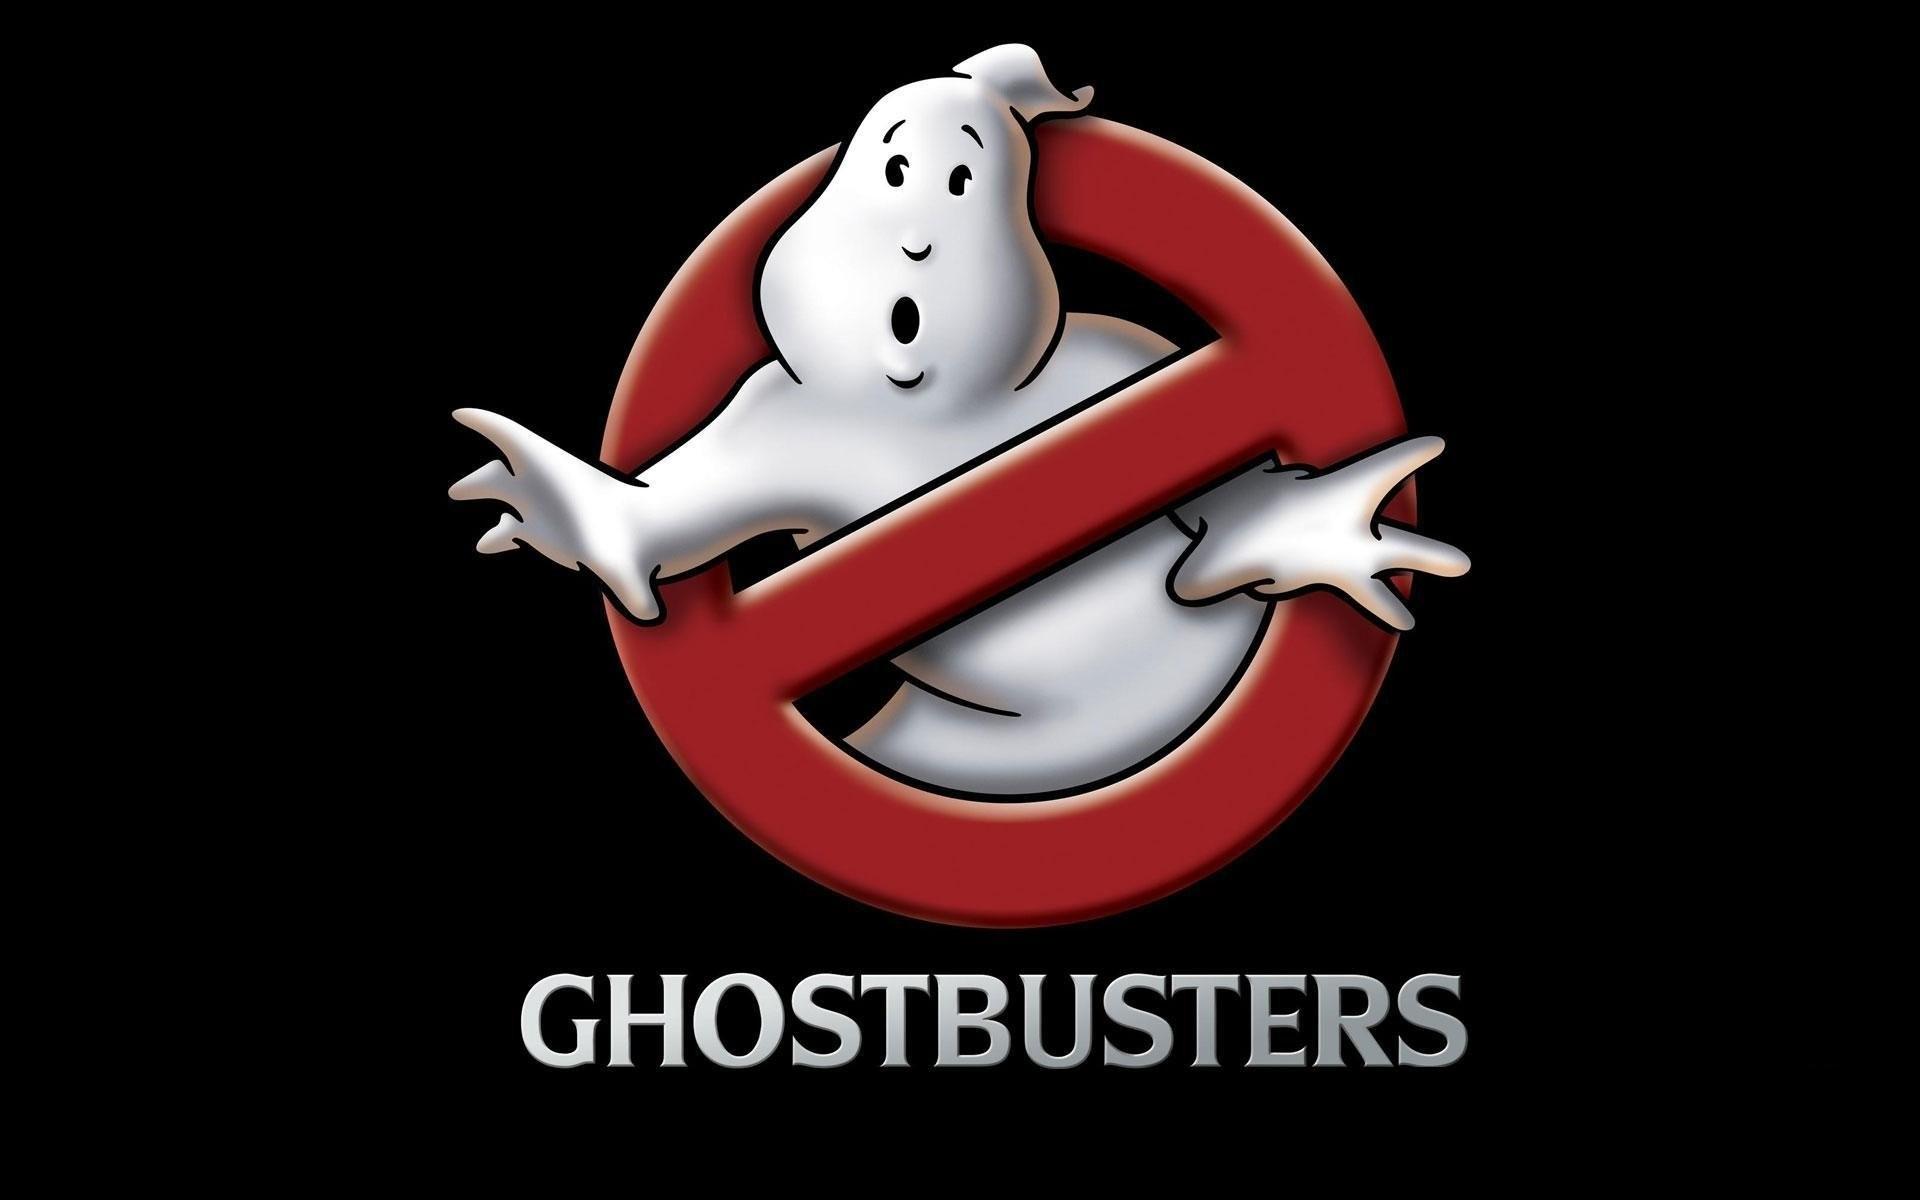 Ghostbuster Wallpaper (the best image in 2018)